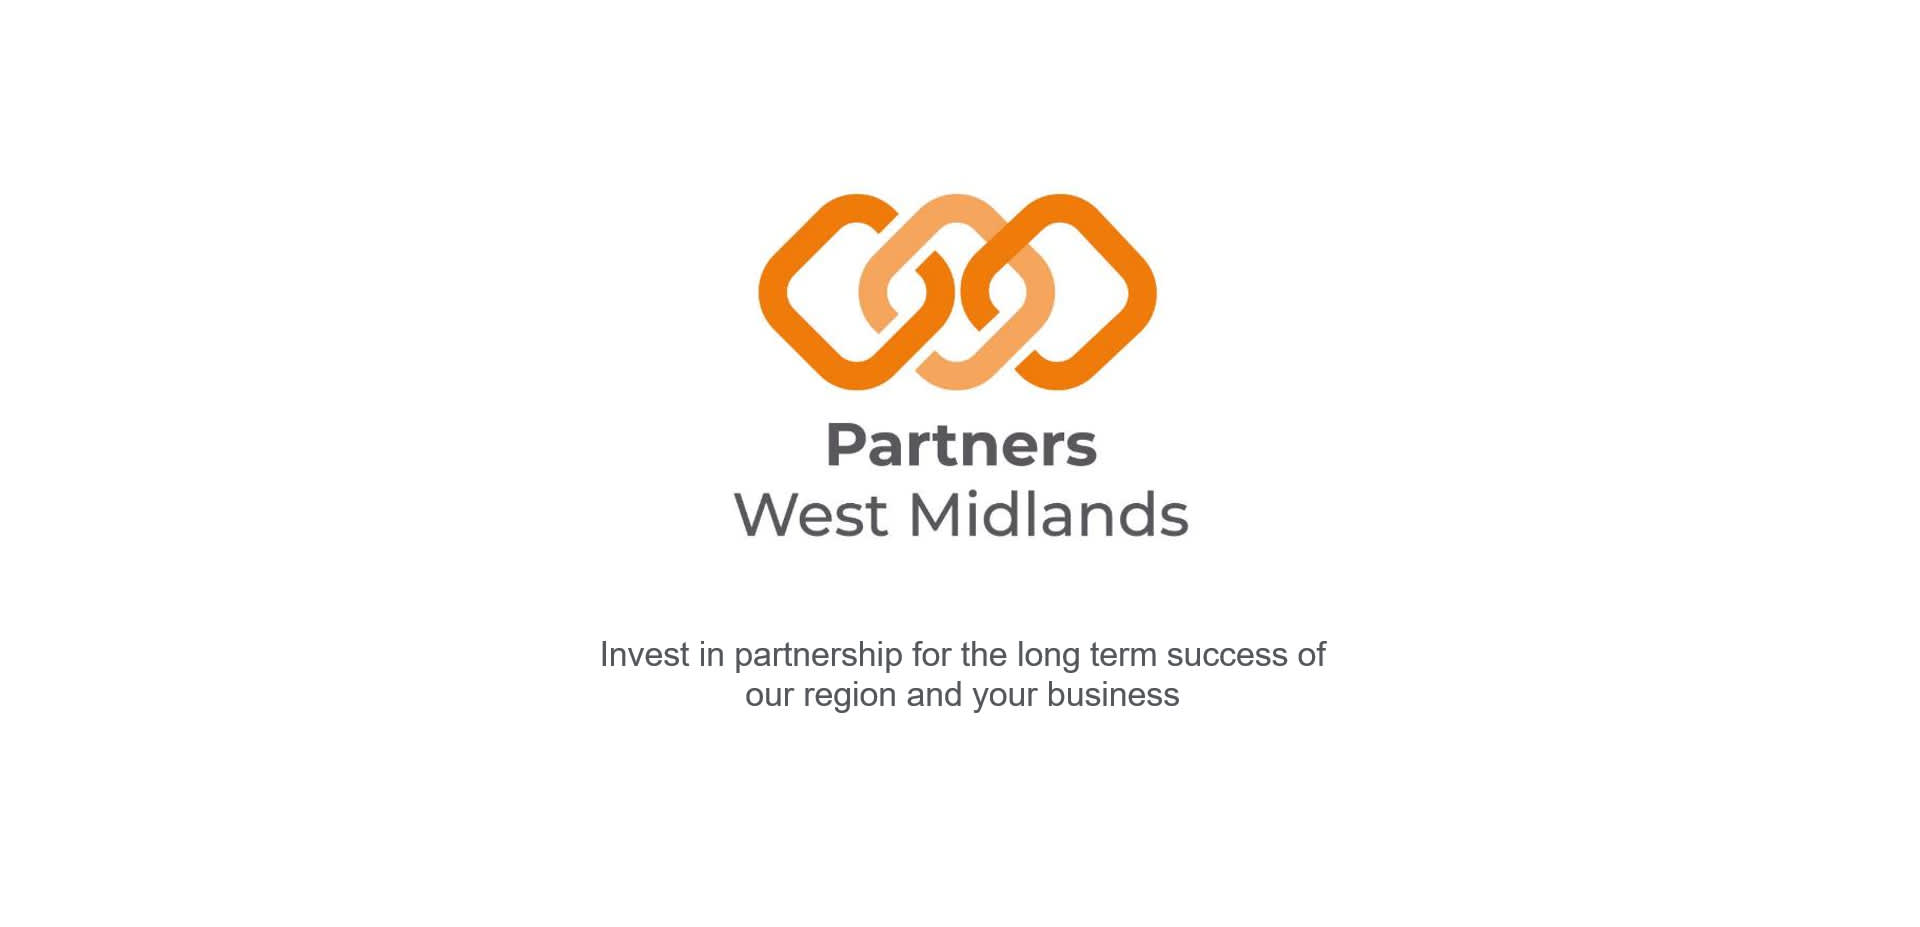 The Partners West Midlands logo, followed by the mission statement "Invest in partnership for the long term success of our region and your business."